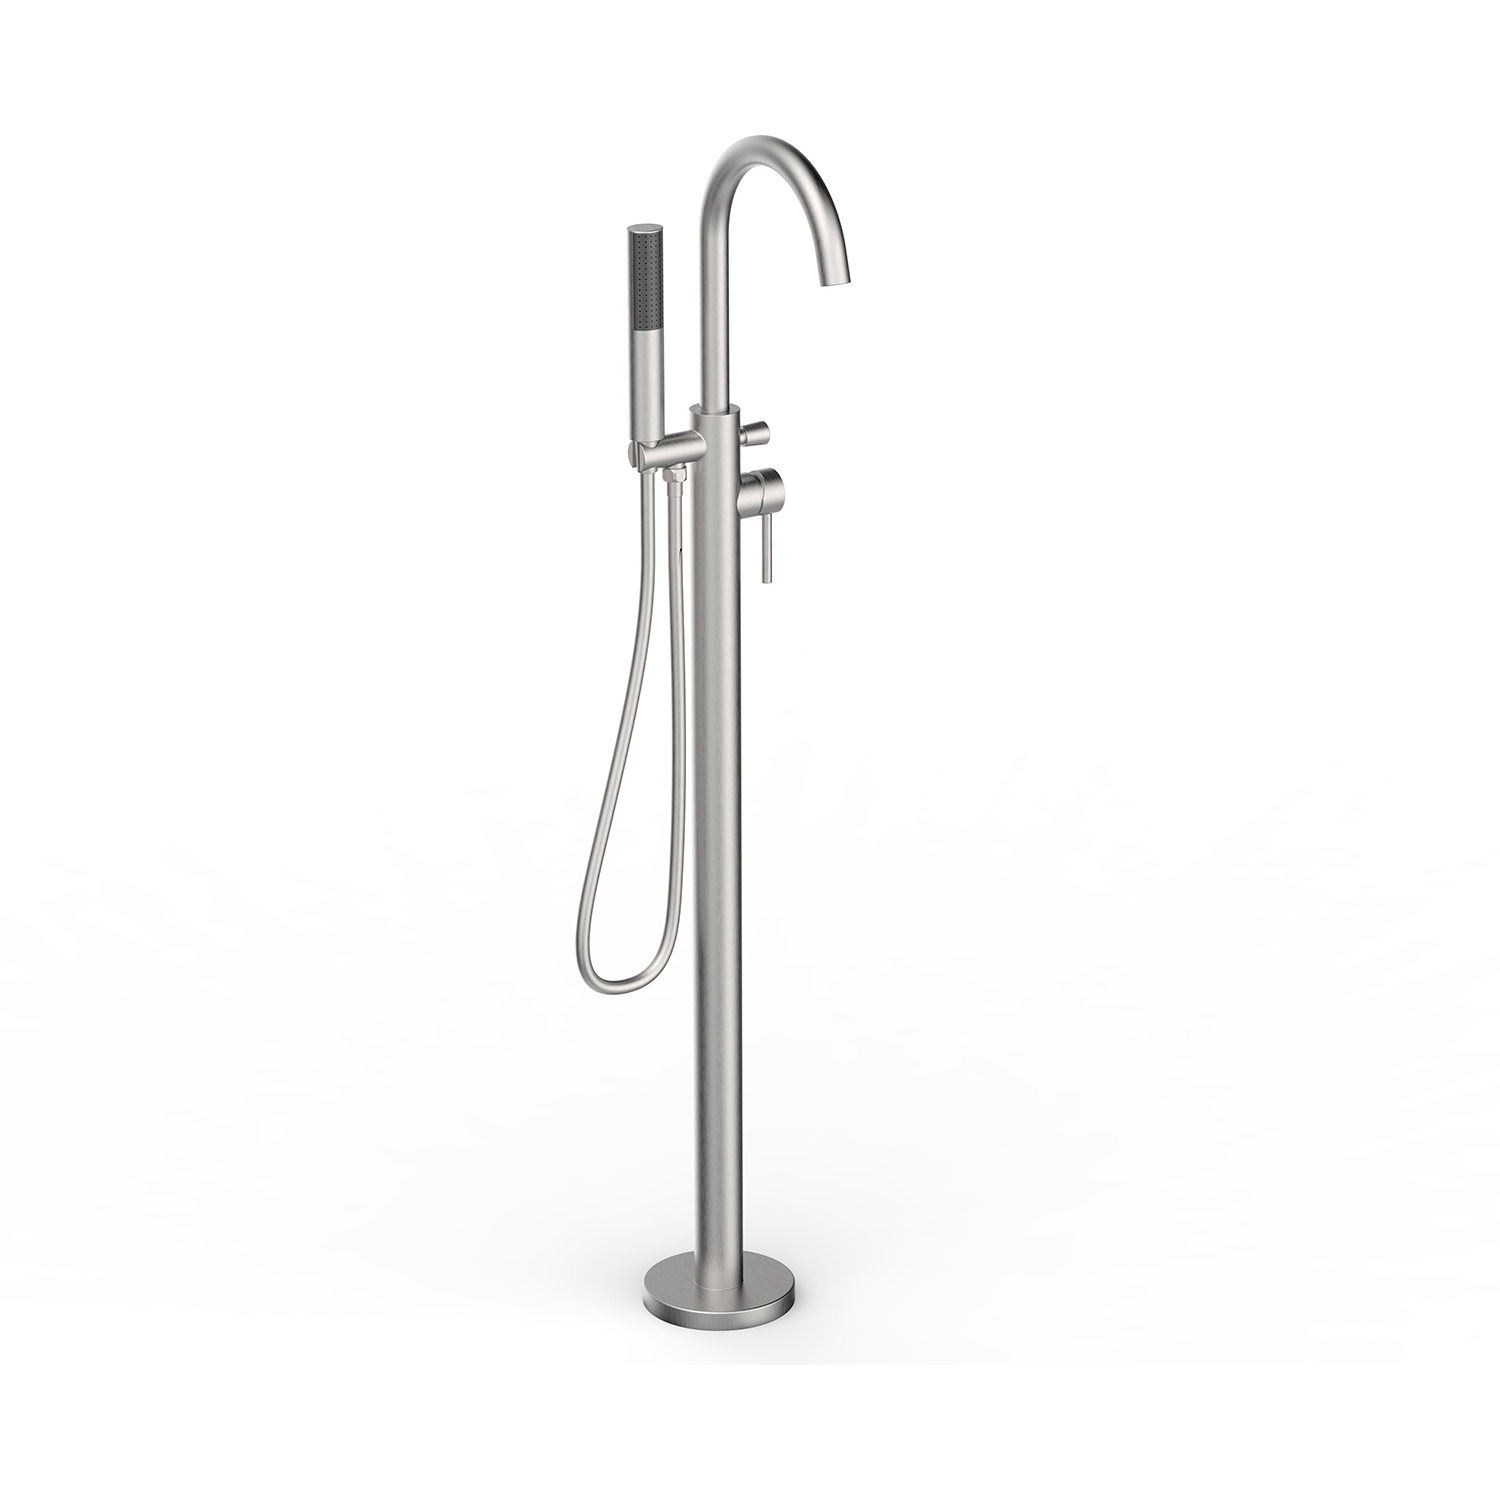 DAX Freestanding Tub Filler with Hand Shower and Gooseneck Spout Brushed Nickel Finish (DAX-8823-BN)